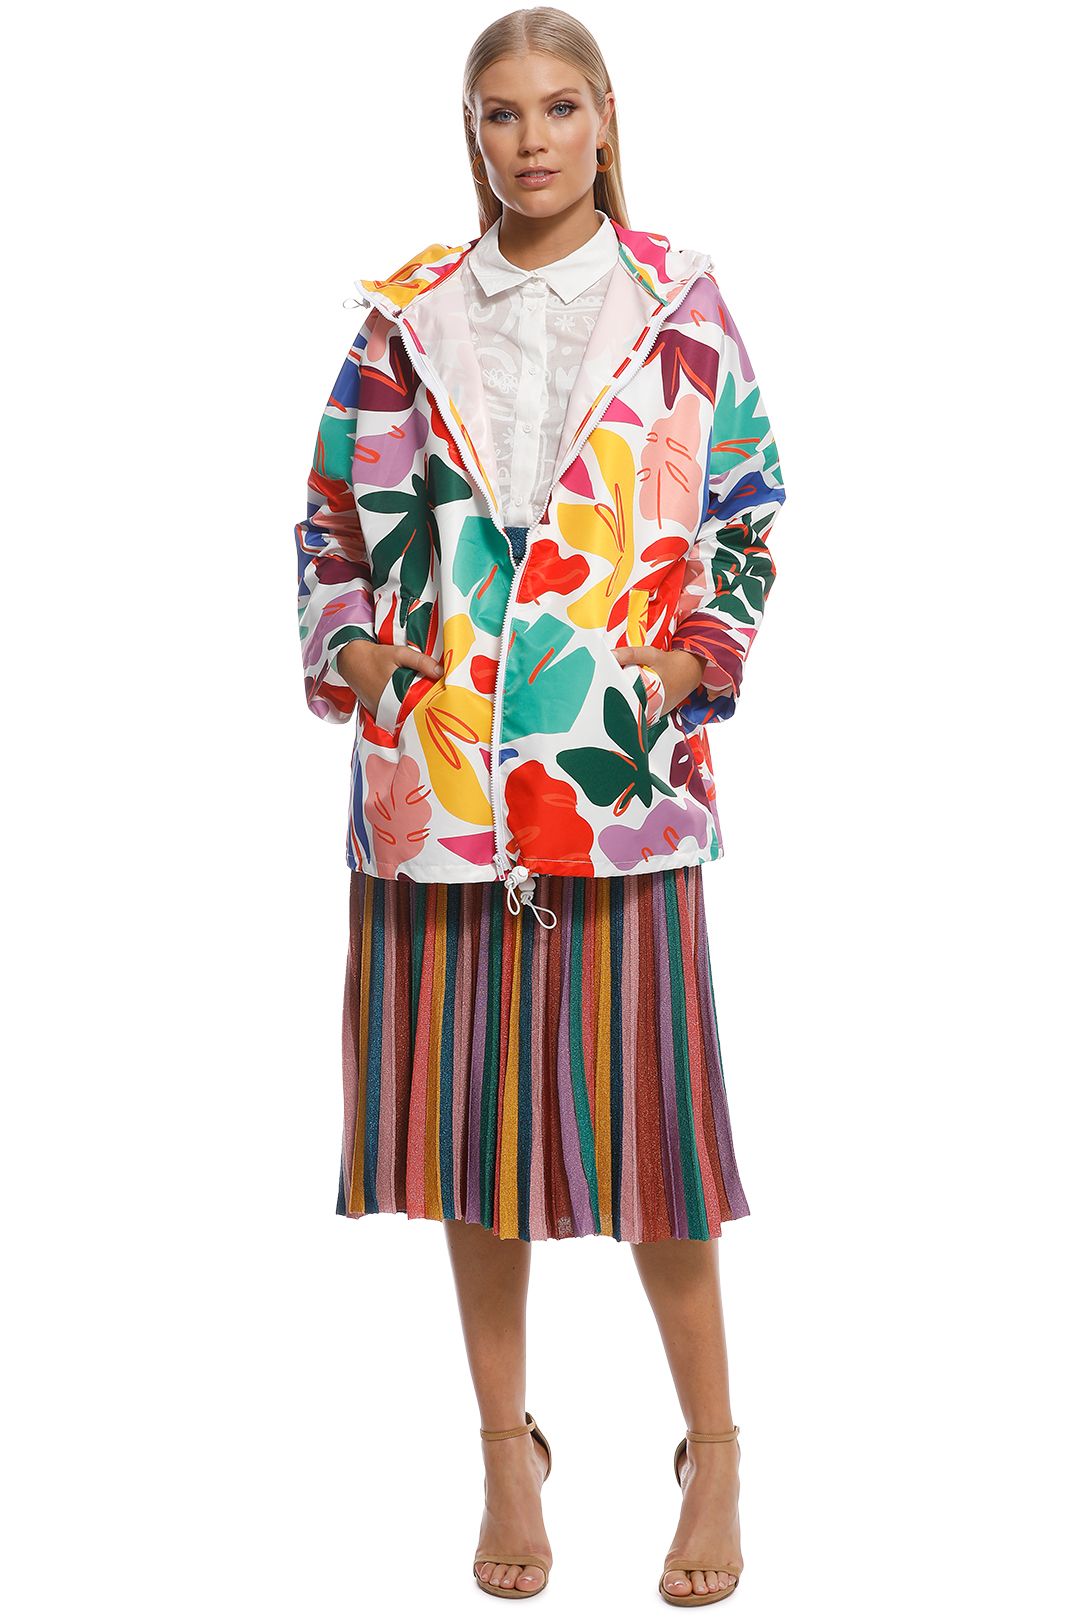 Gorman - Frondly Face Raincoat - Front